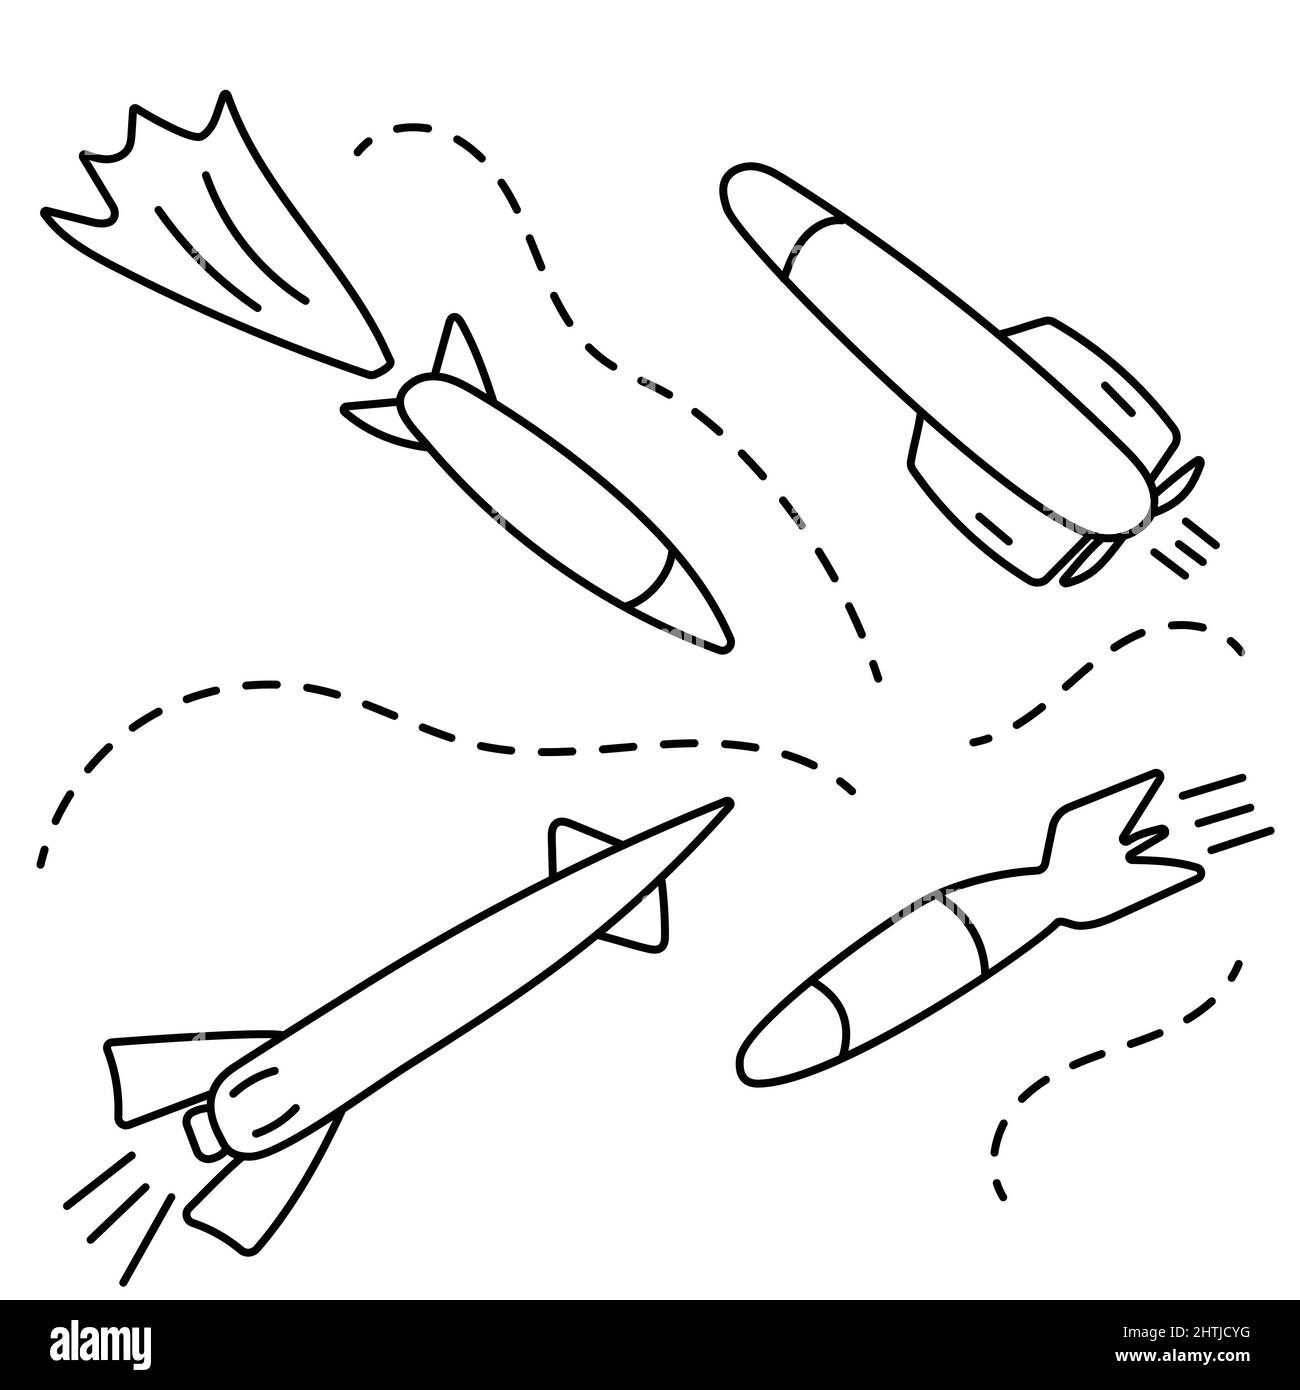 Flying military missiles, warheads. Active military operations. Hand drawn prints and doodle. Stock Vector